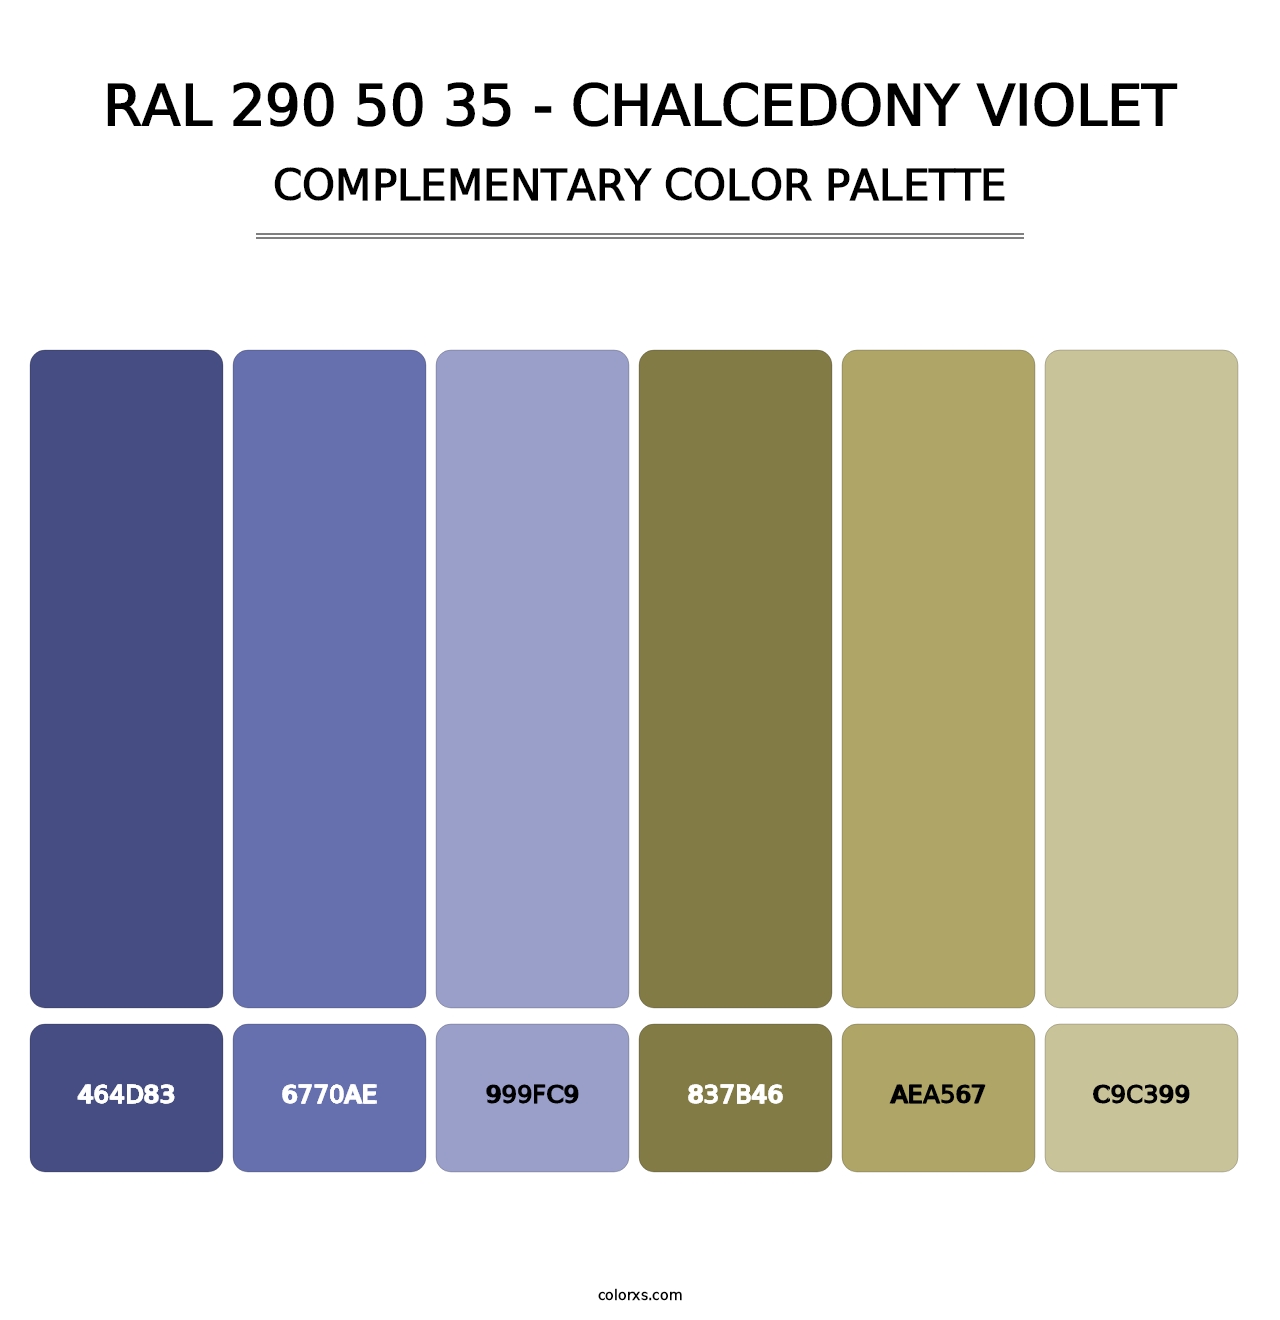 RAL 290 50 35 - Chalcedony Violet - Complementary Color Palette